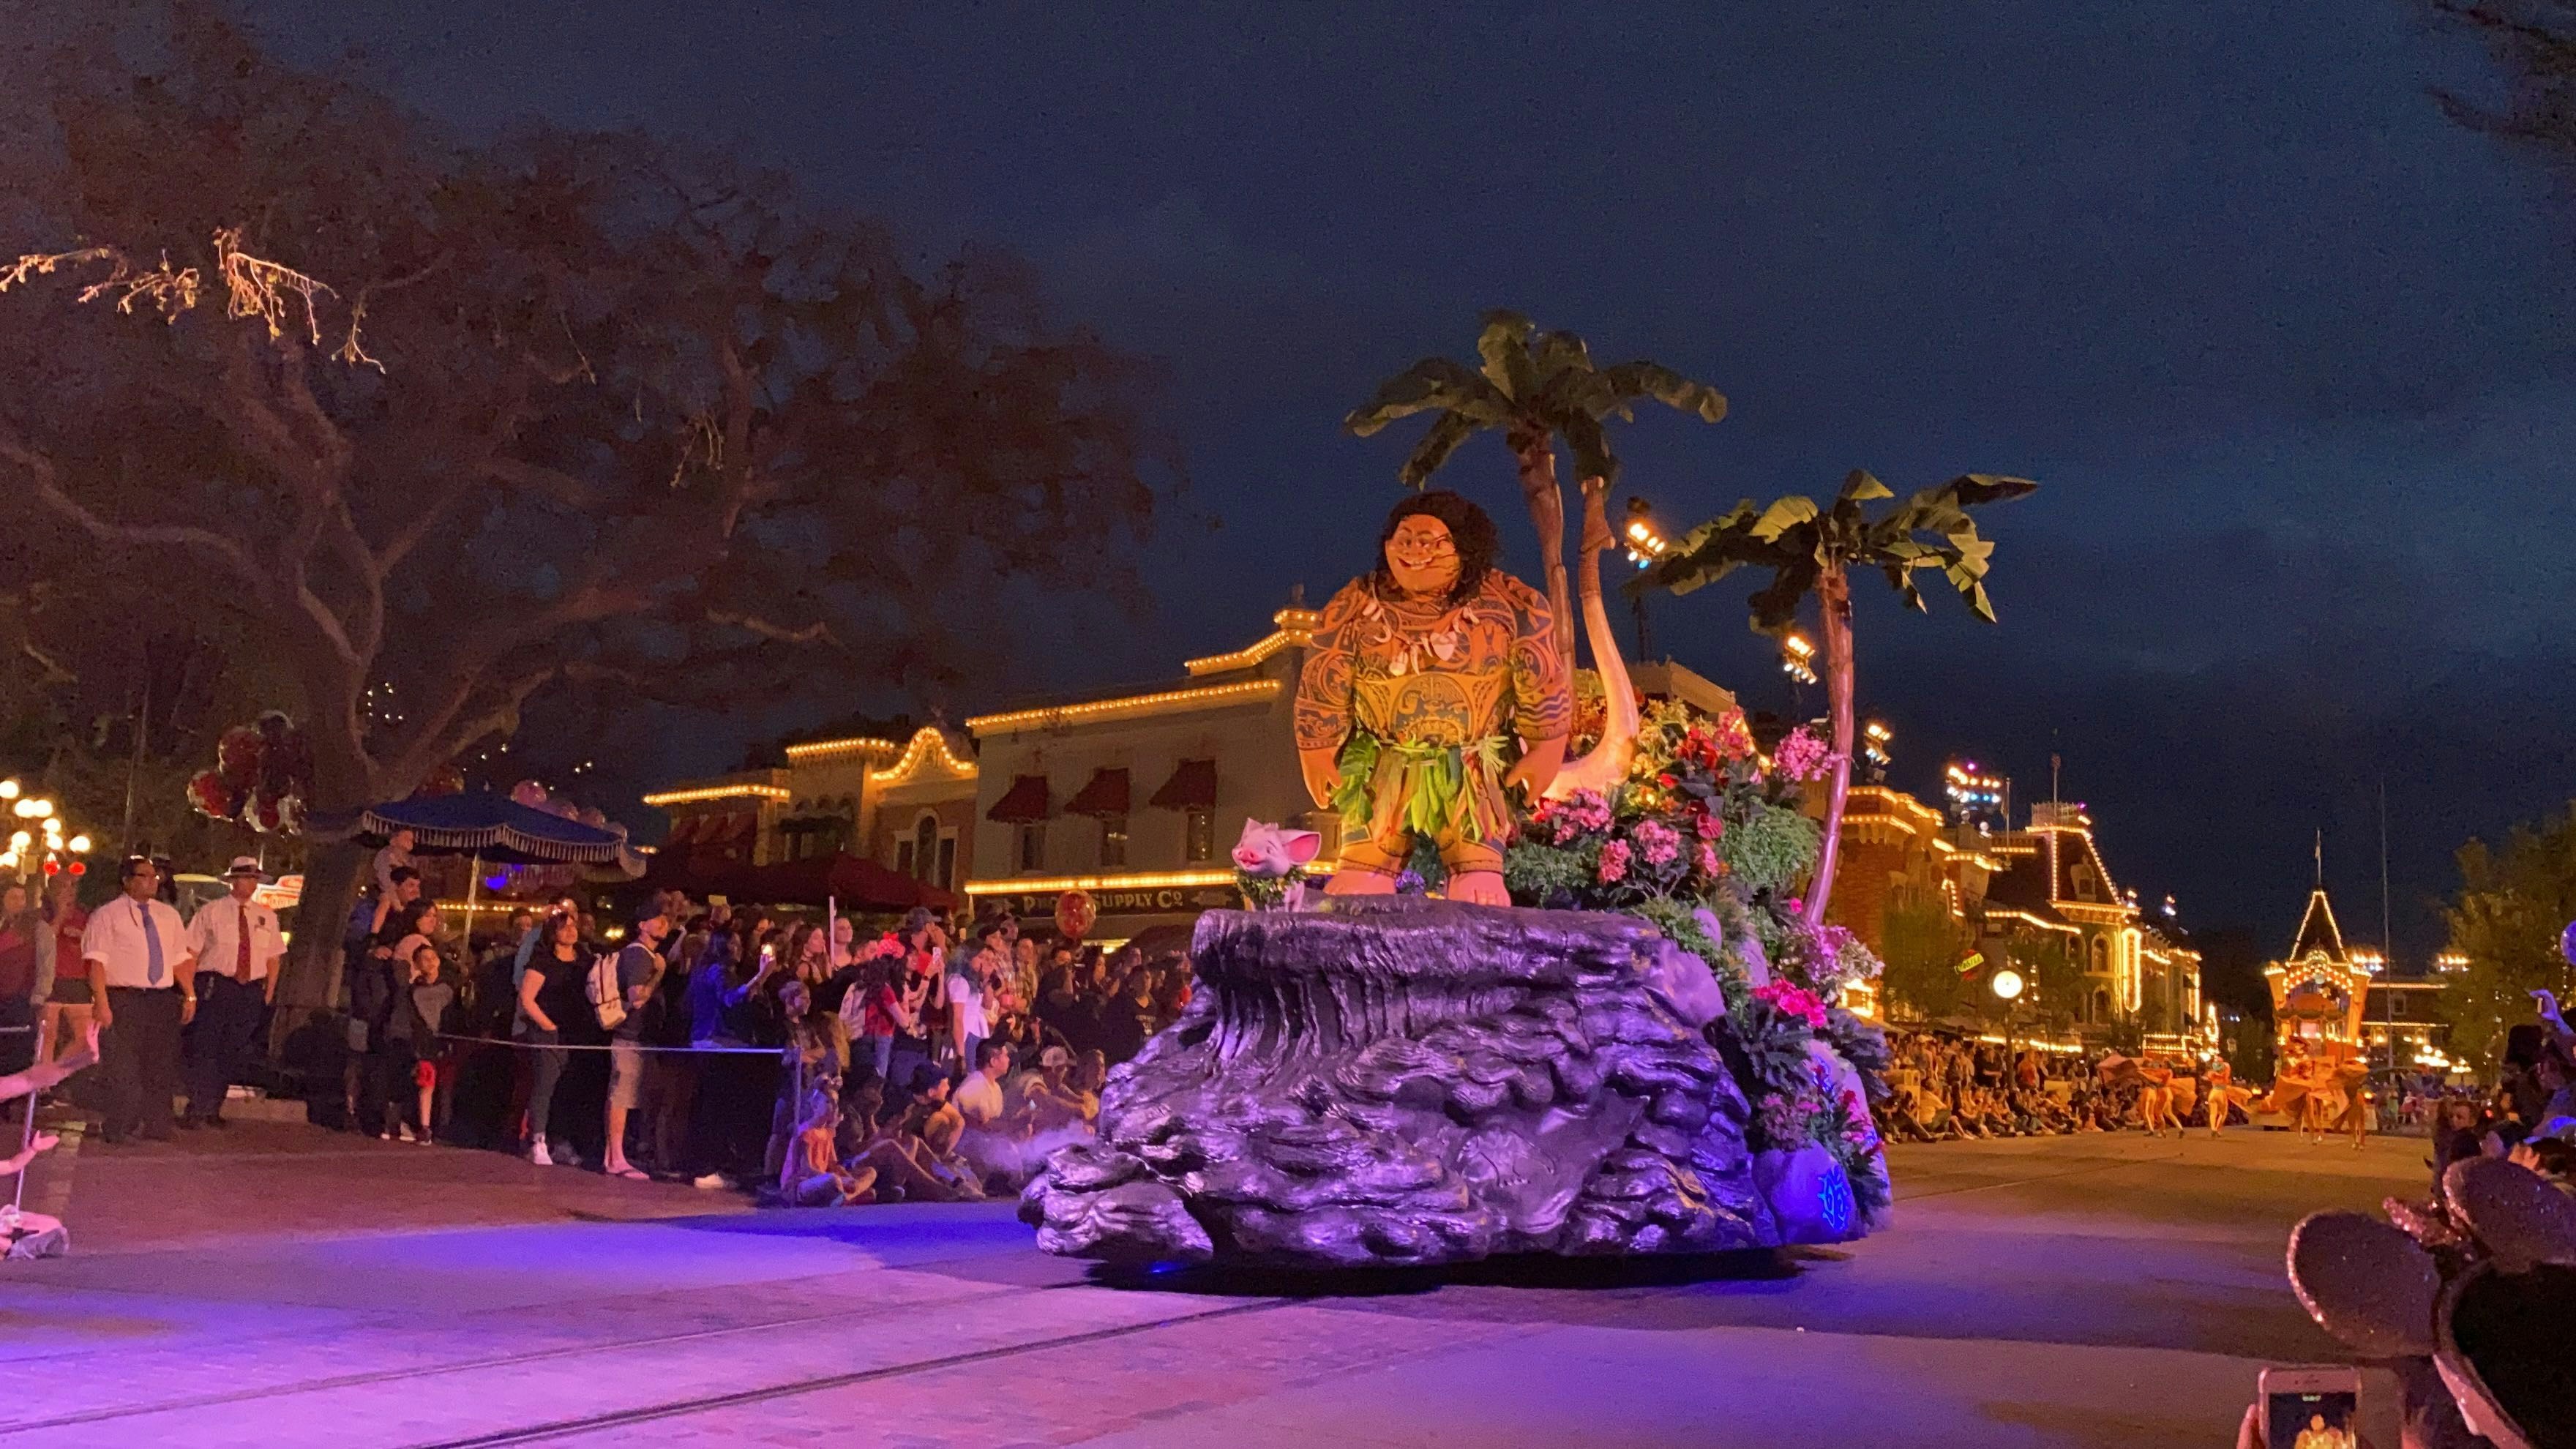 PHOTOS, VIDEO New "Magic Happens" Parade Dazzles After Dark with